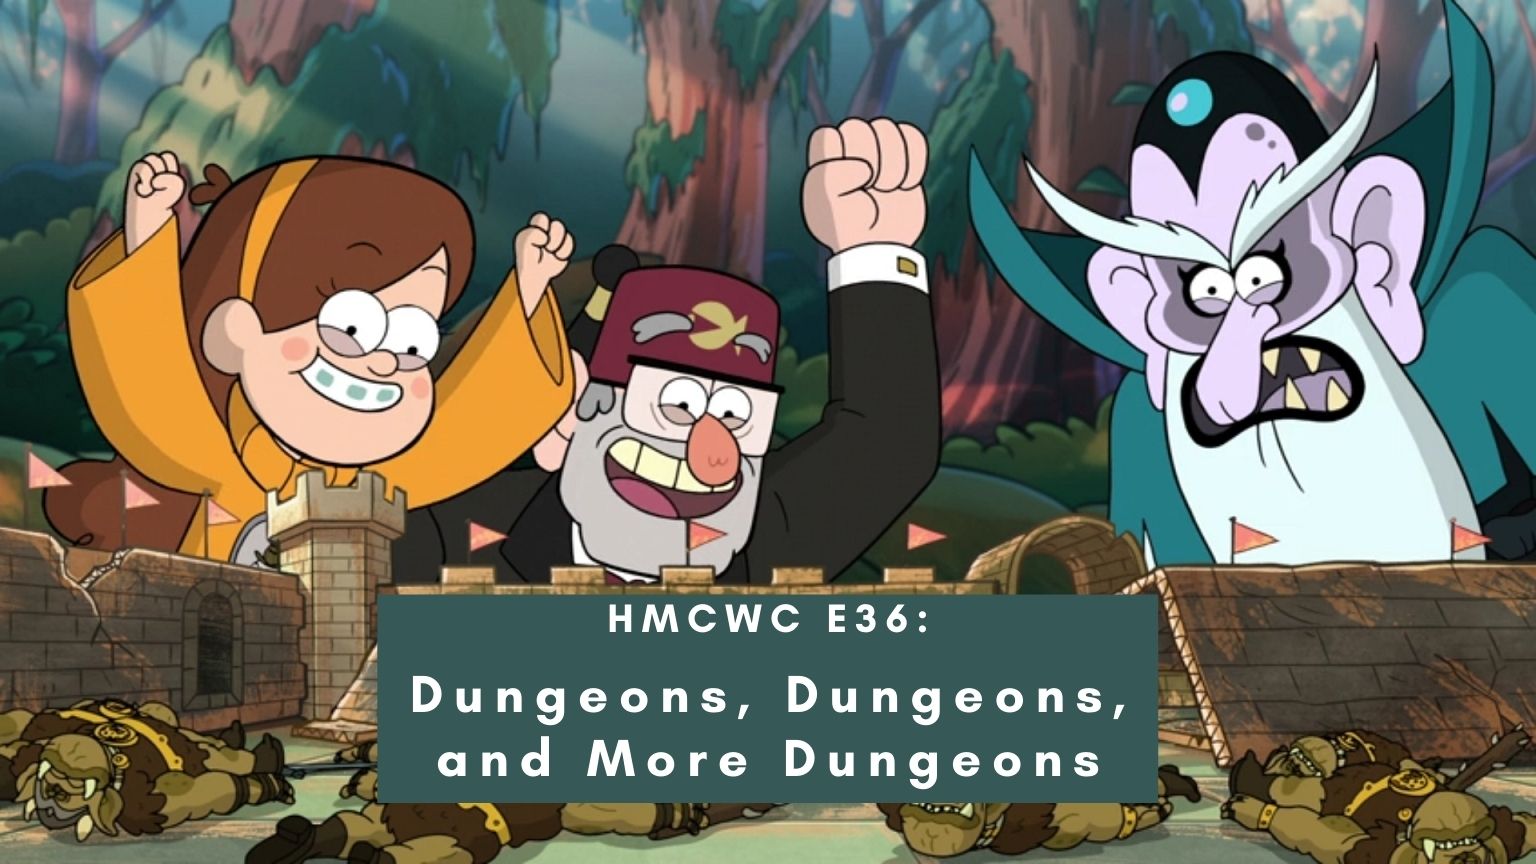 HMCWC E36: Gravity Falls- Dungeons, Dungeons, and More Dungeons